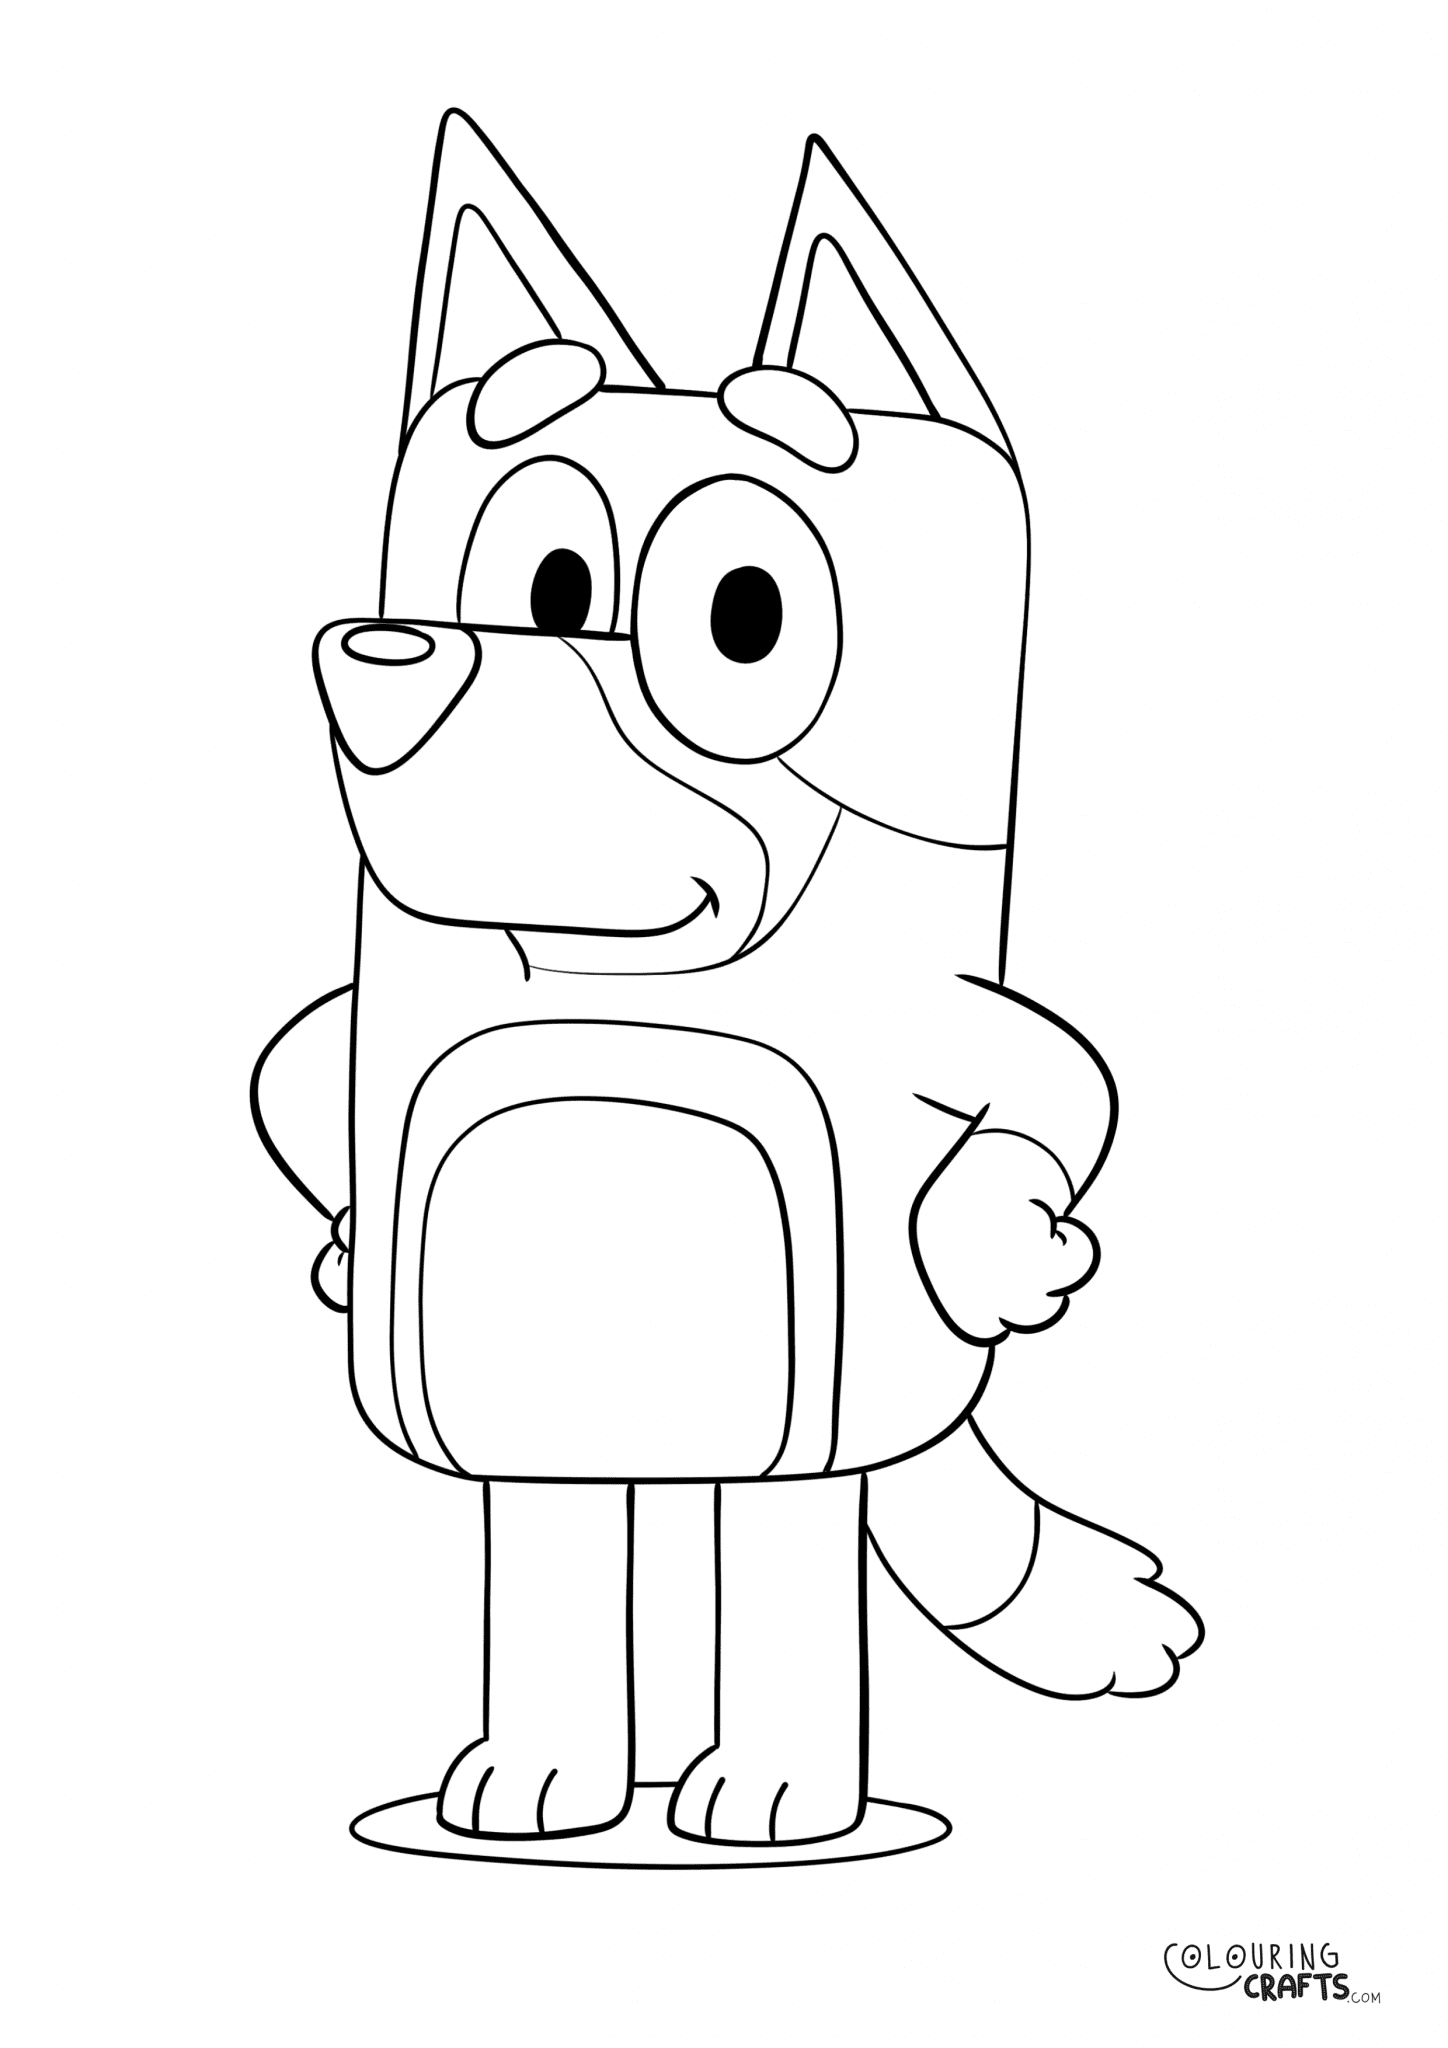 Bluey 2 Colouring Page - Colouring Crafts